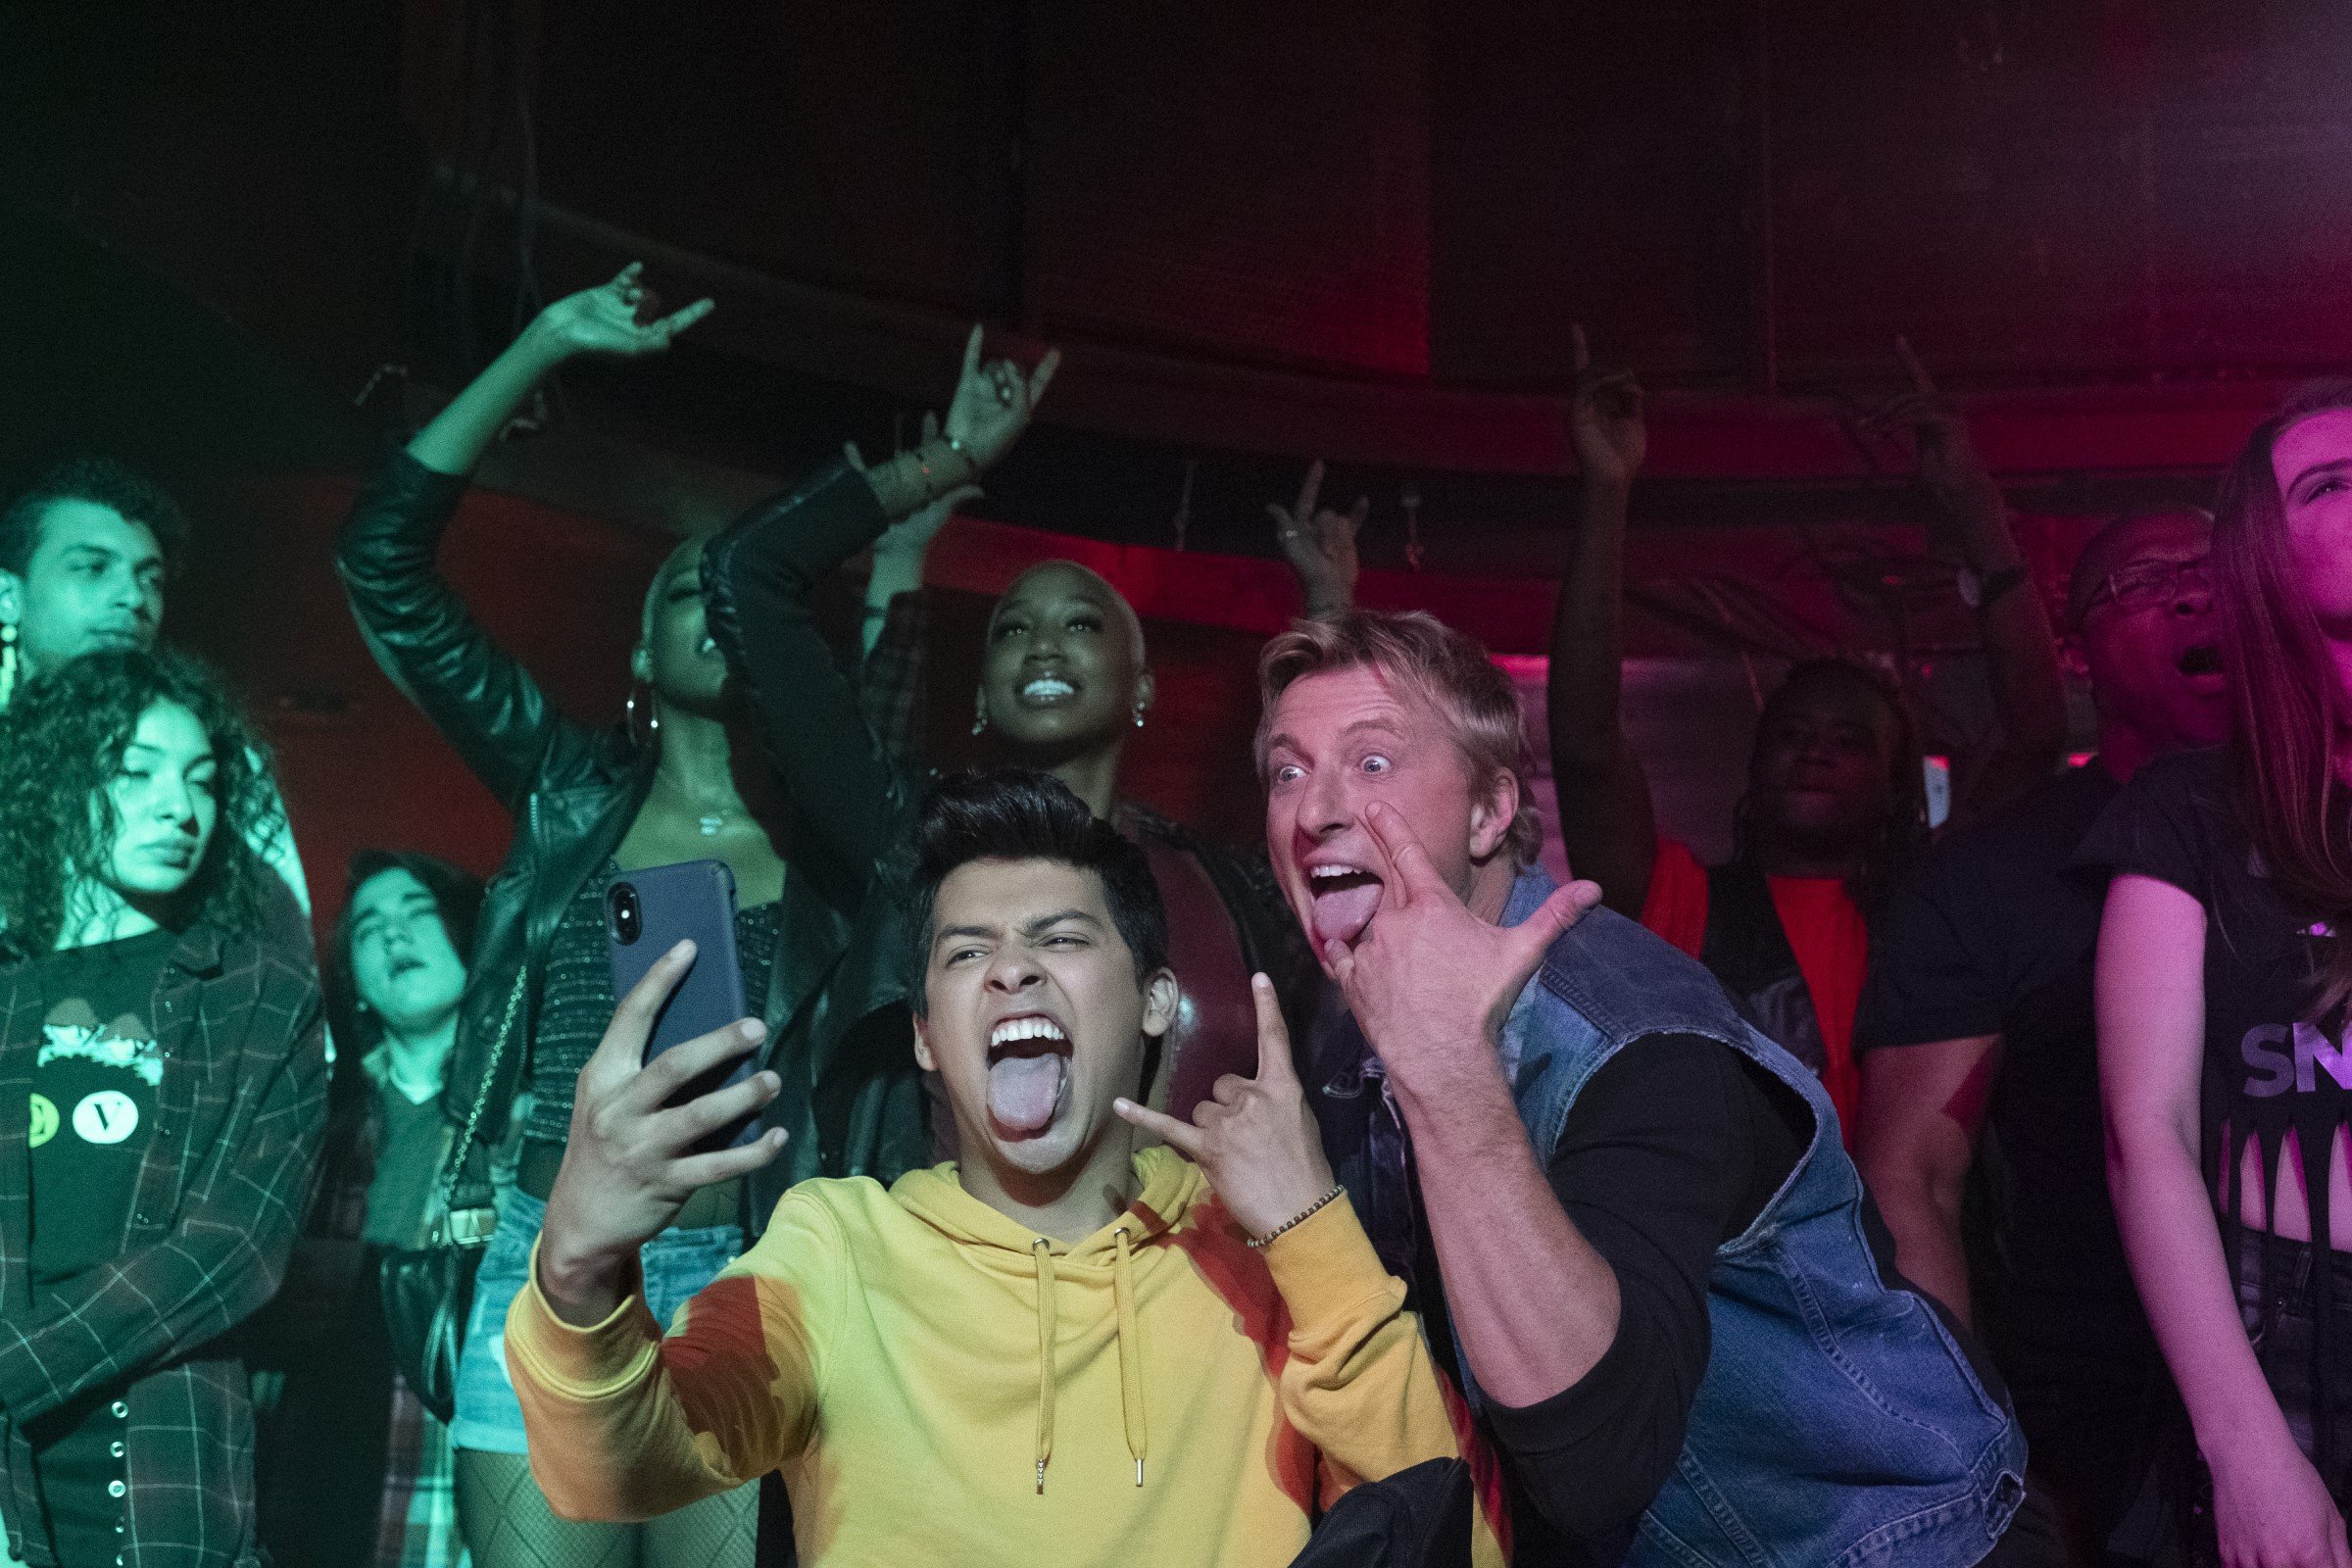 Cobra Kai: Johnny Lawrence and Miguel at a Dee Snider concert